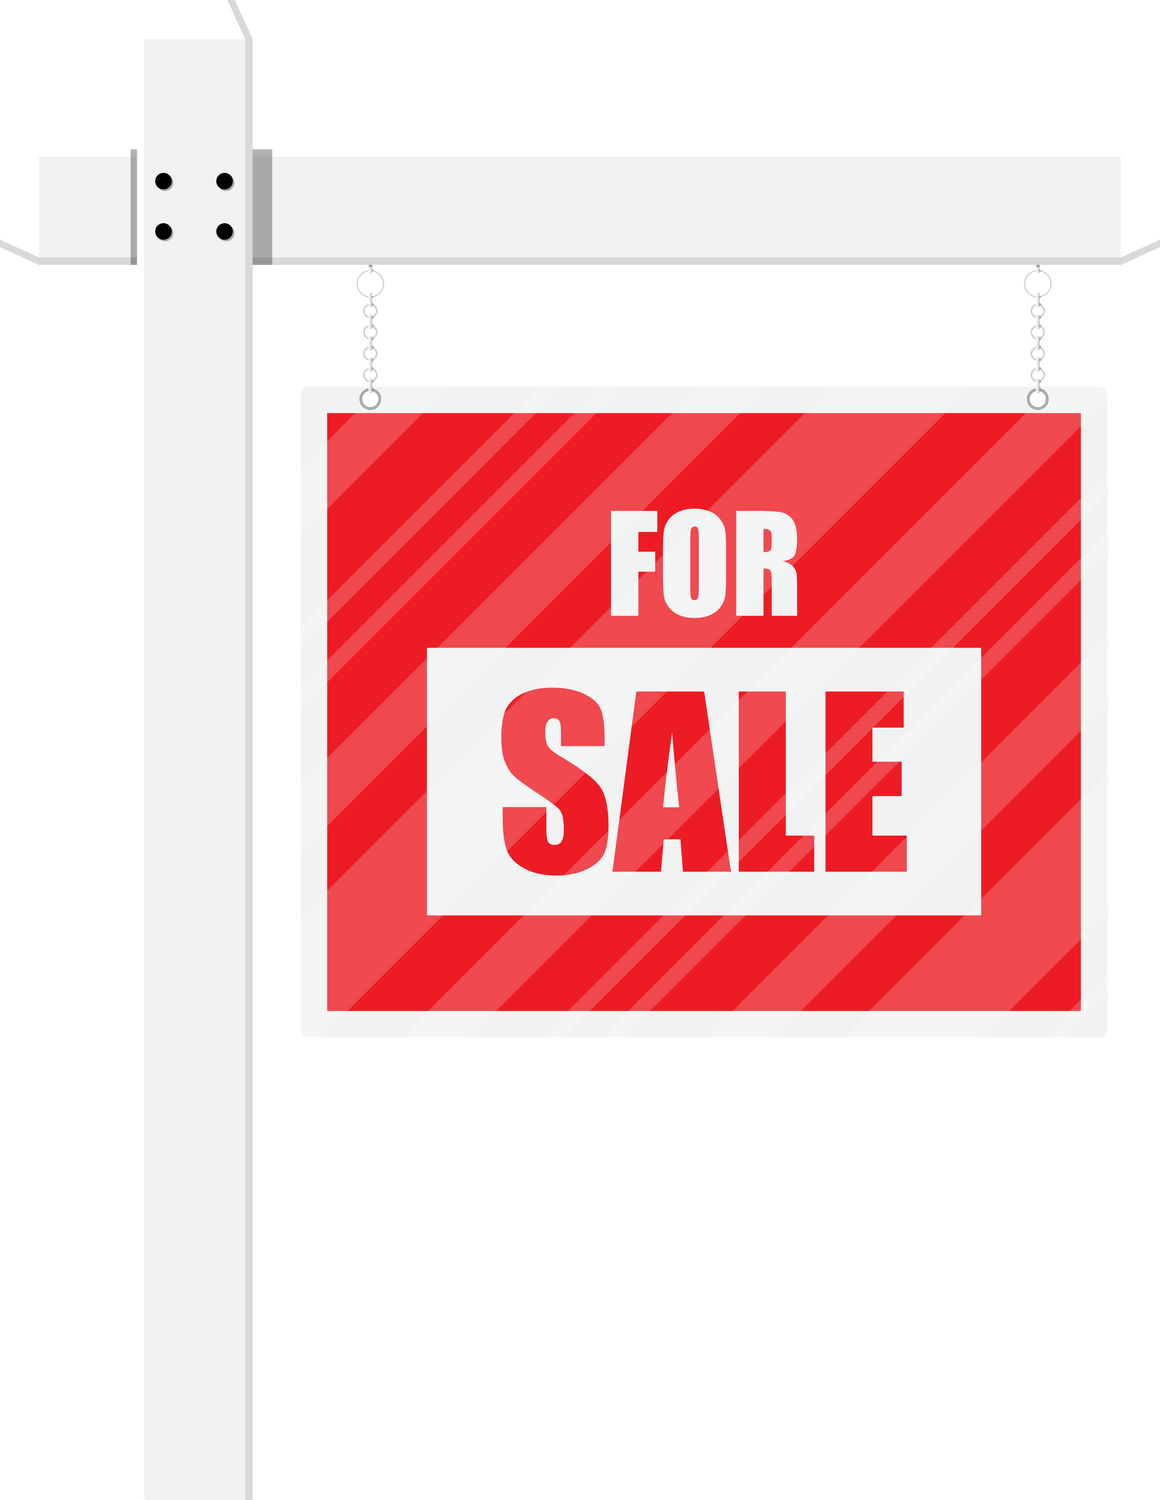 For Sale Wooden Placard. Real Estate Sign